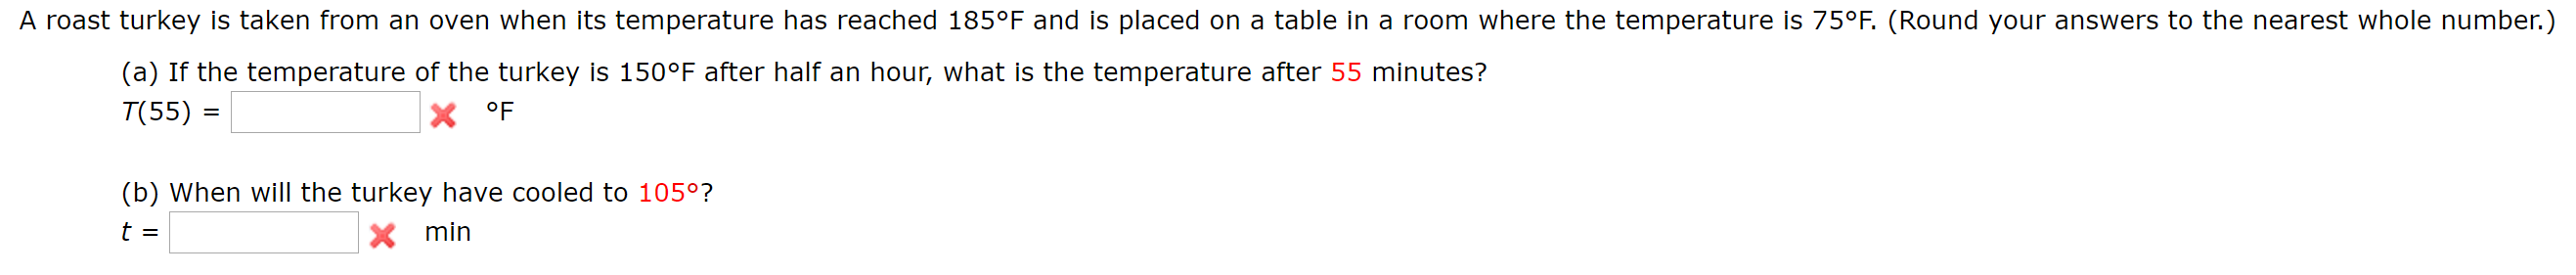 A roast turkey is taken from an oven when its temperature has reached 185°F and is placed on a table in a room where the temperature is 75°F. (Round your answers to the nearest whole number.)
(a) If the temperature of the turkey is 150°F after half an hour, what is the temperature after 55 minutes?
T(55) =
X °F
(b) When will the turkey have cooled to 105°?
t =
Xmin
